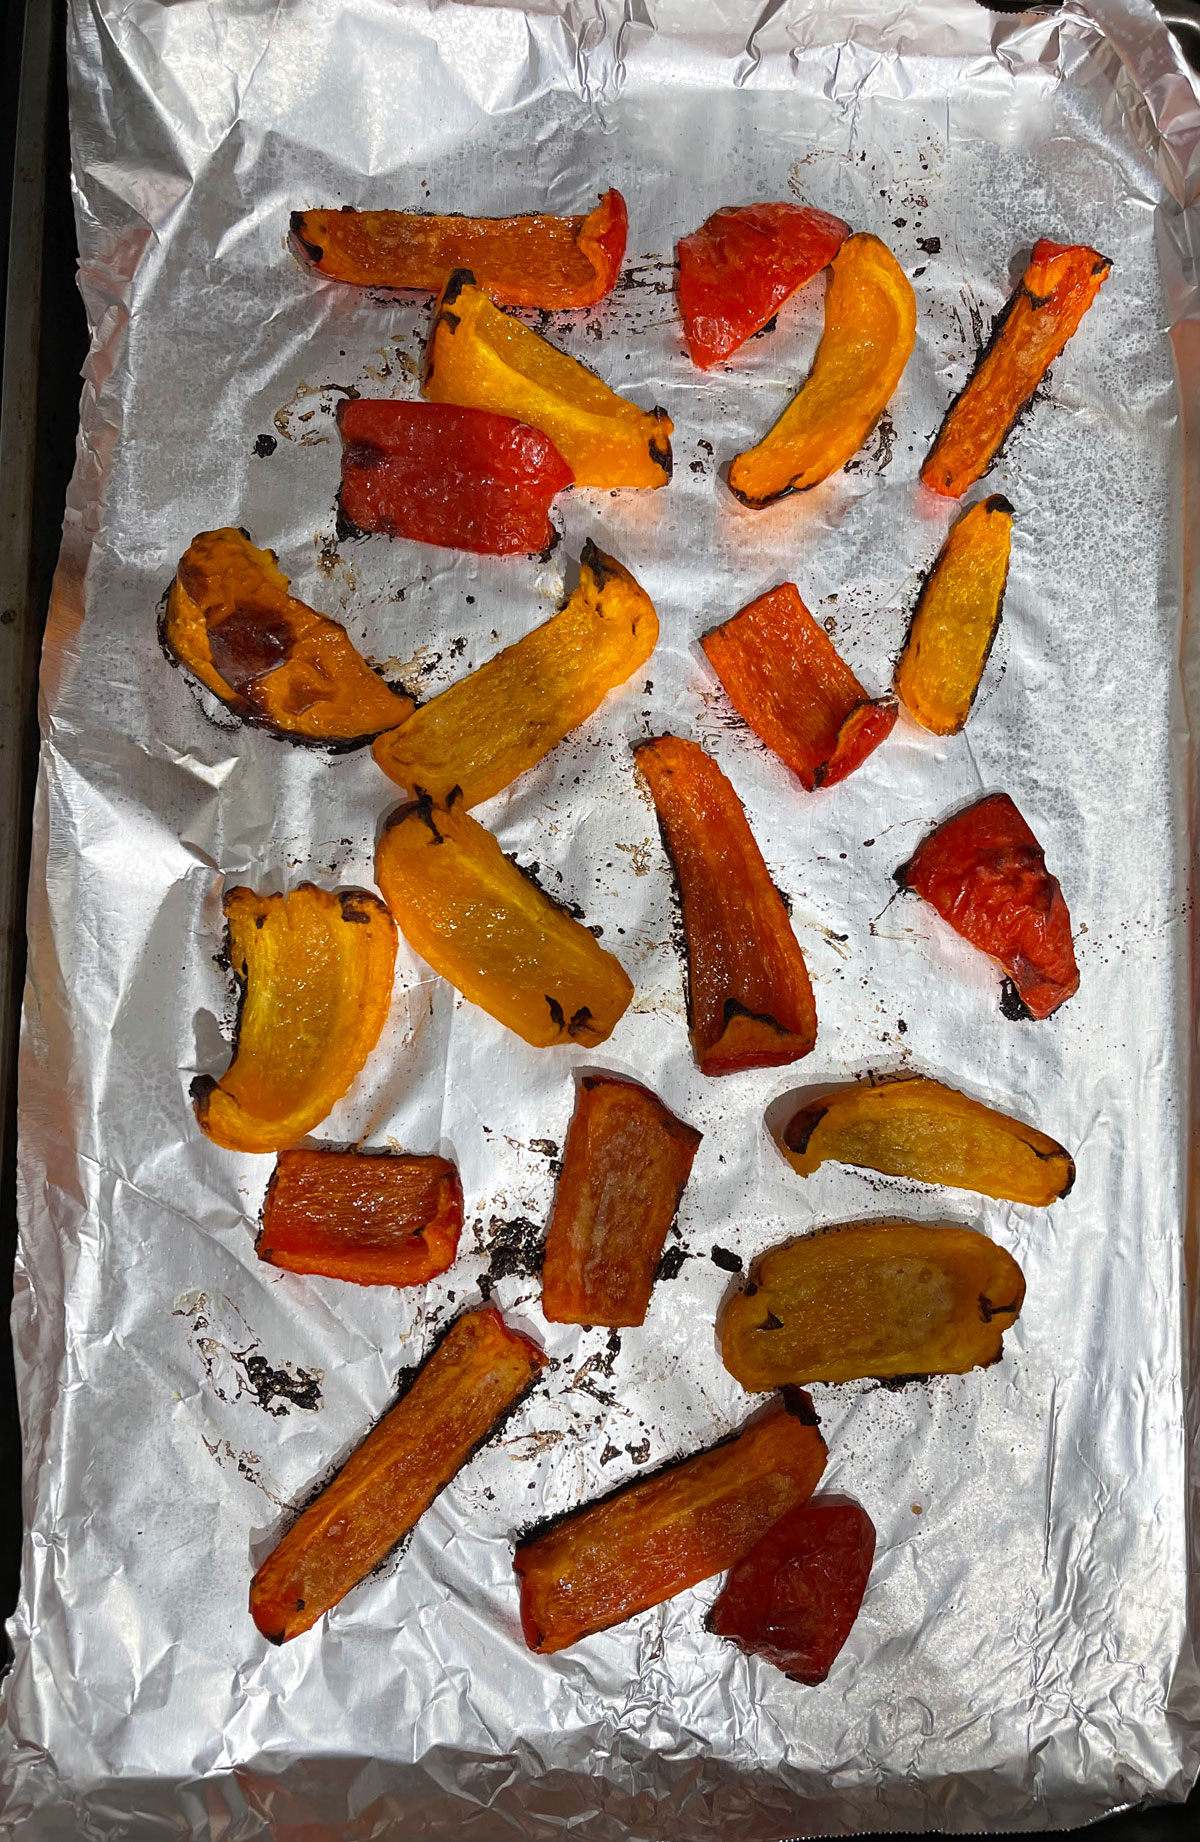 roasted bell peppers